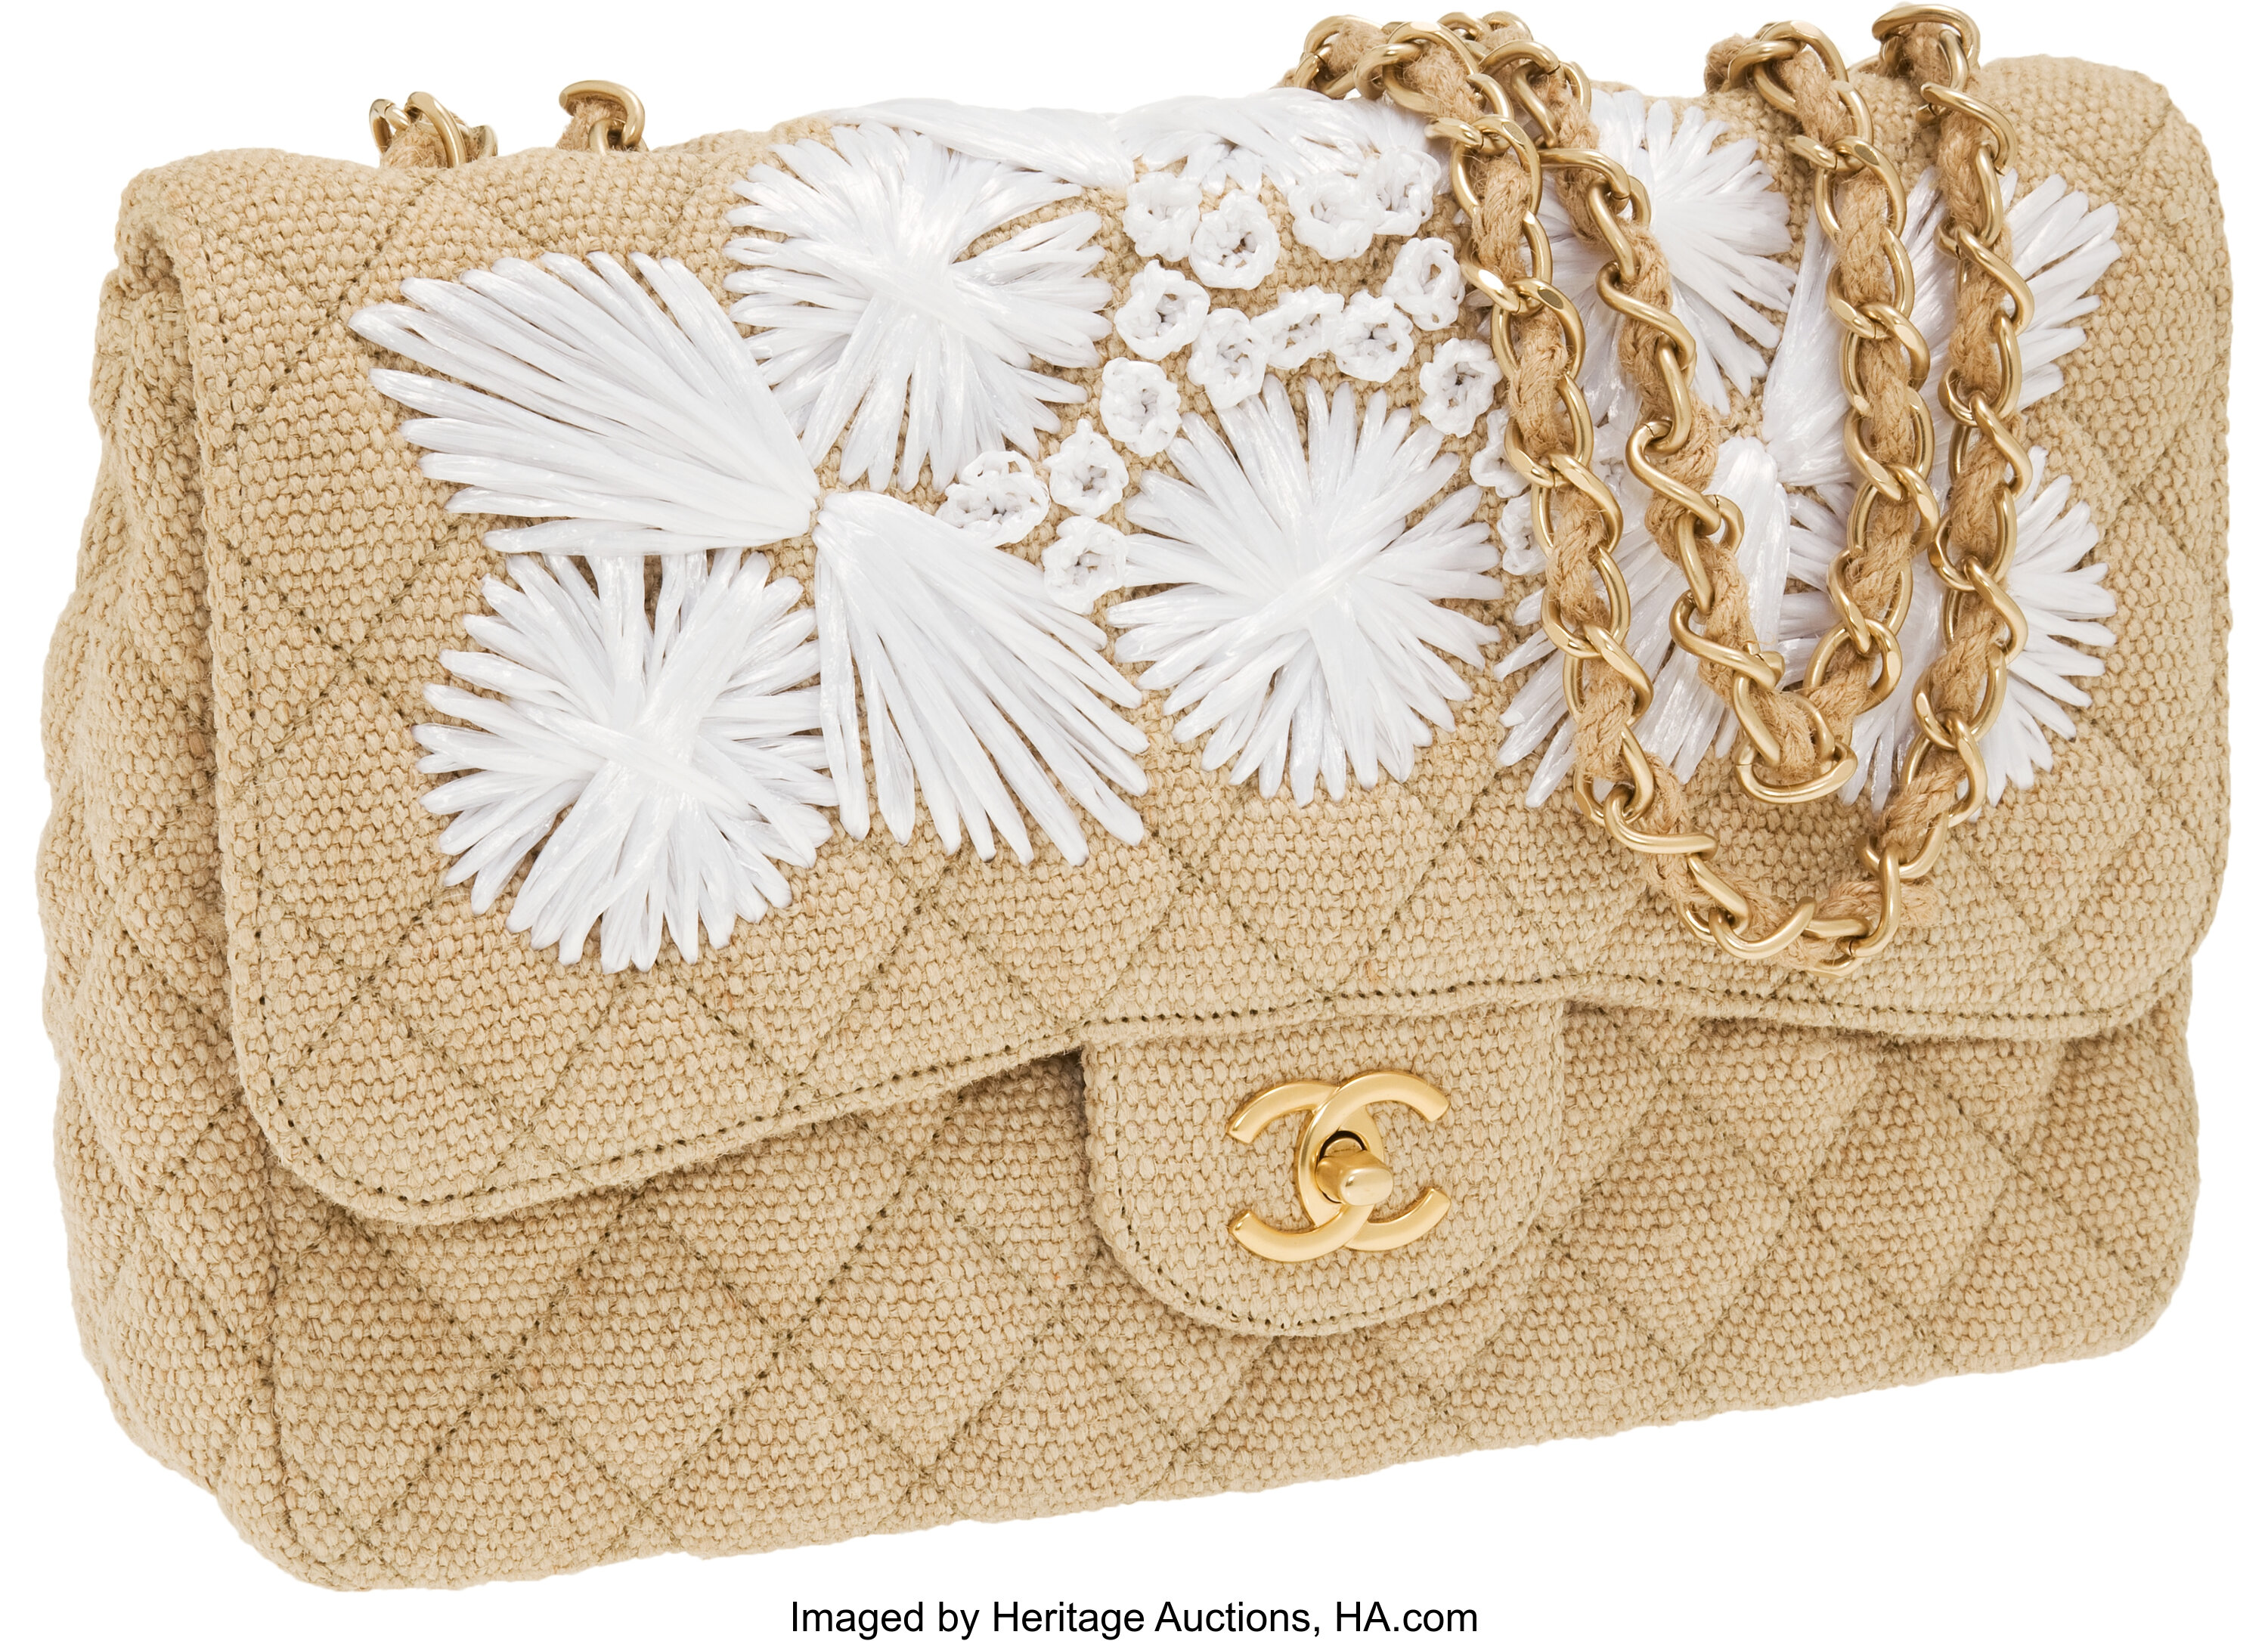 Chanel Limited Edition Classic Jumbo Single Flap Bag with Woven